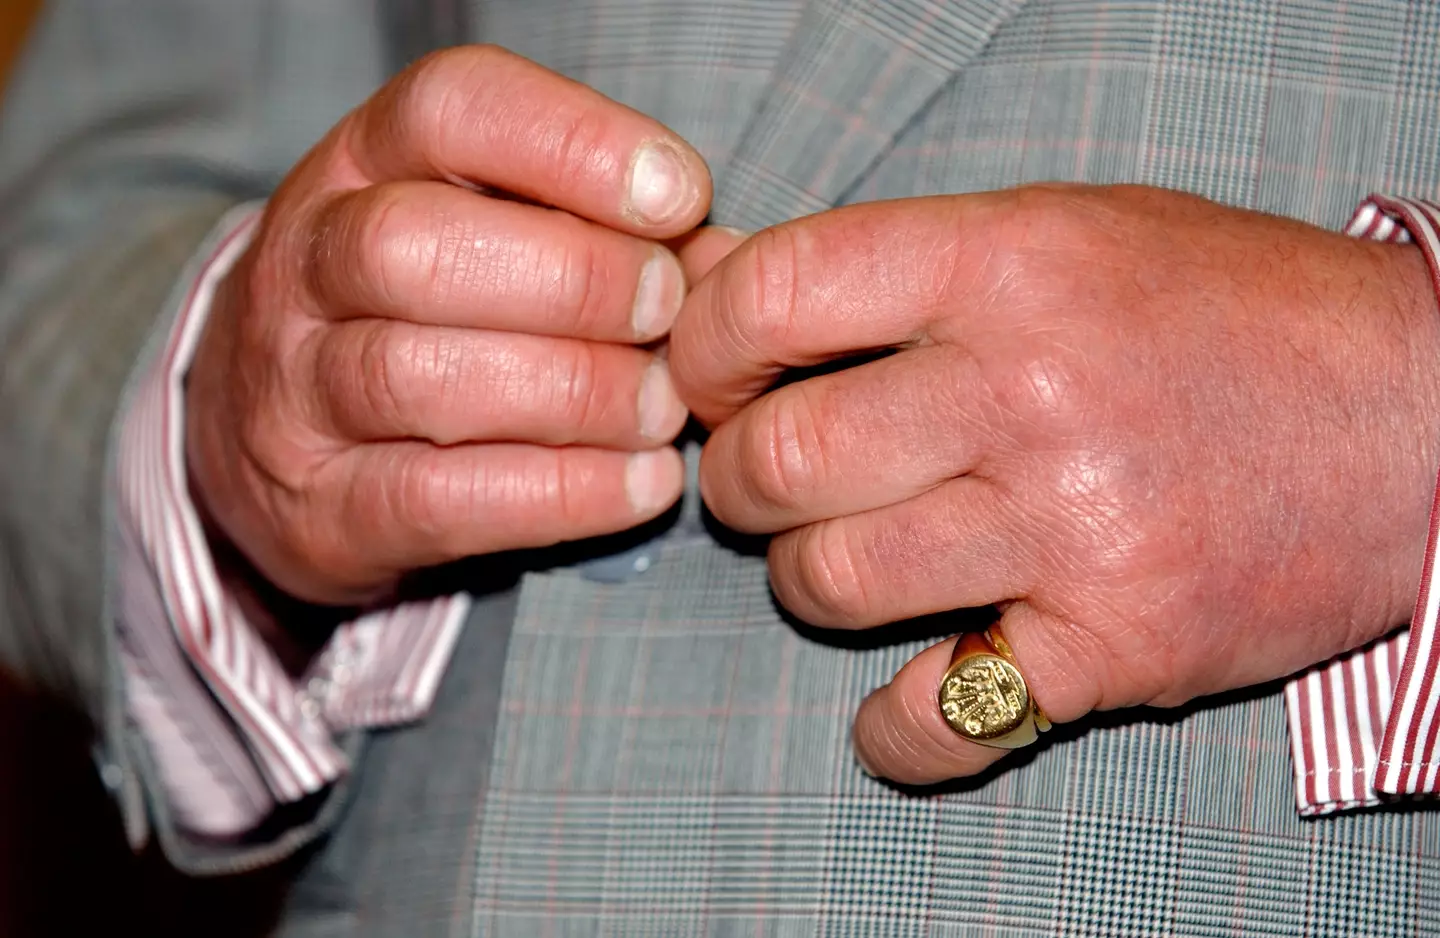 People want to know why King Charles III's hands look so swollen.